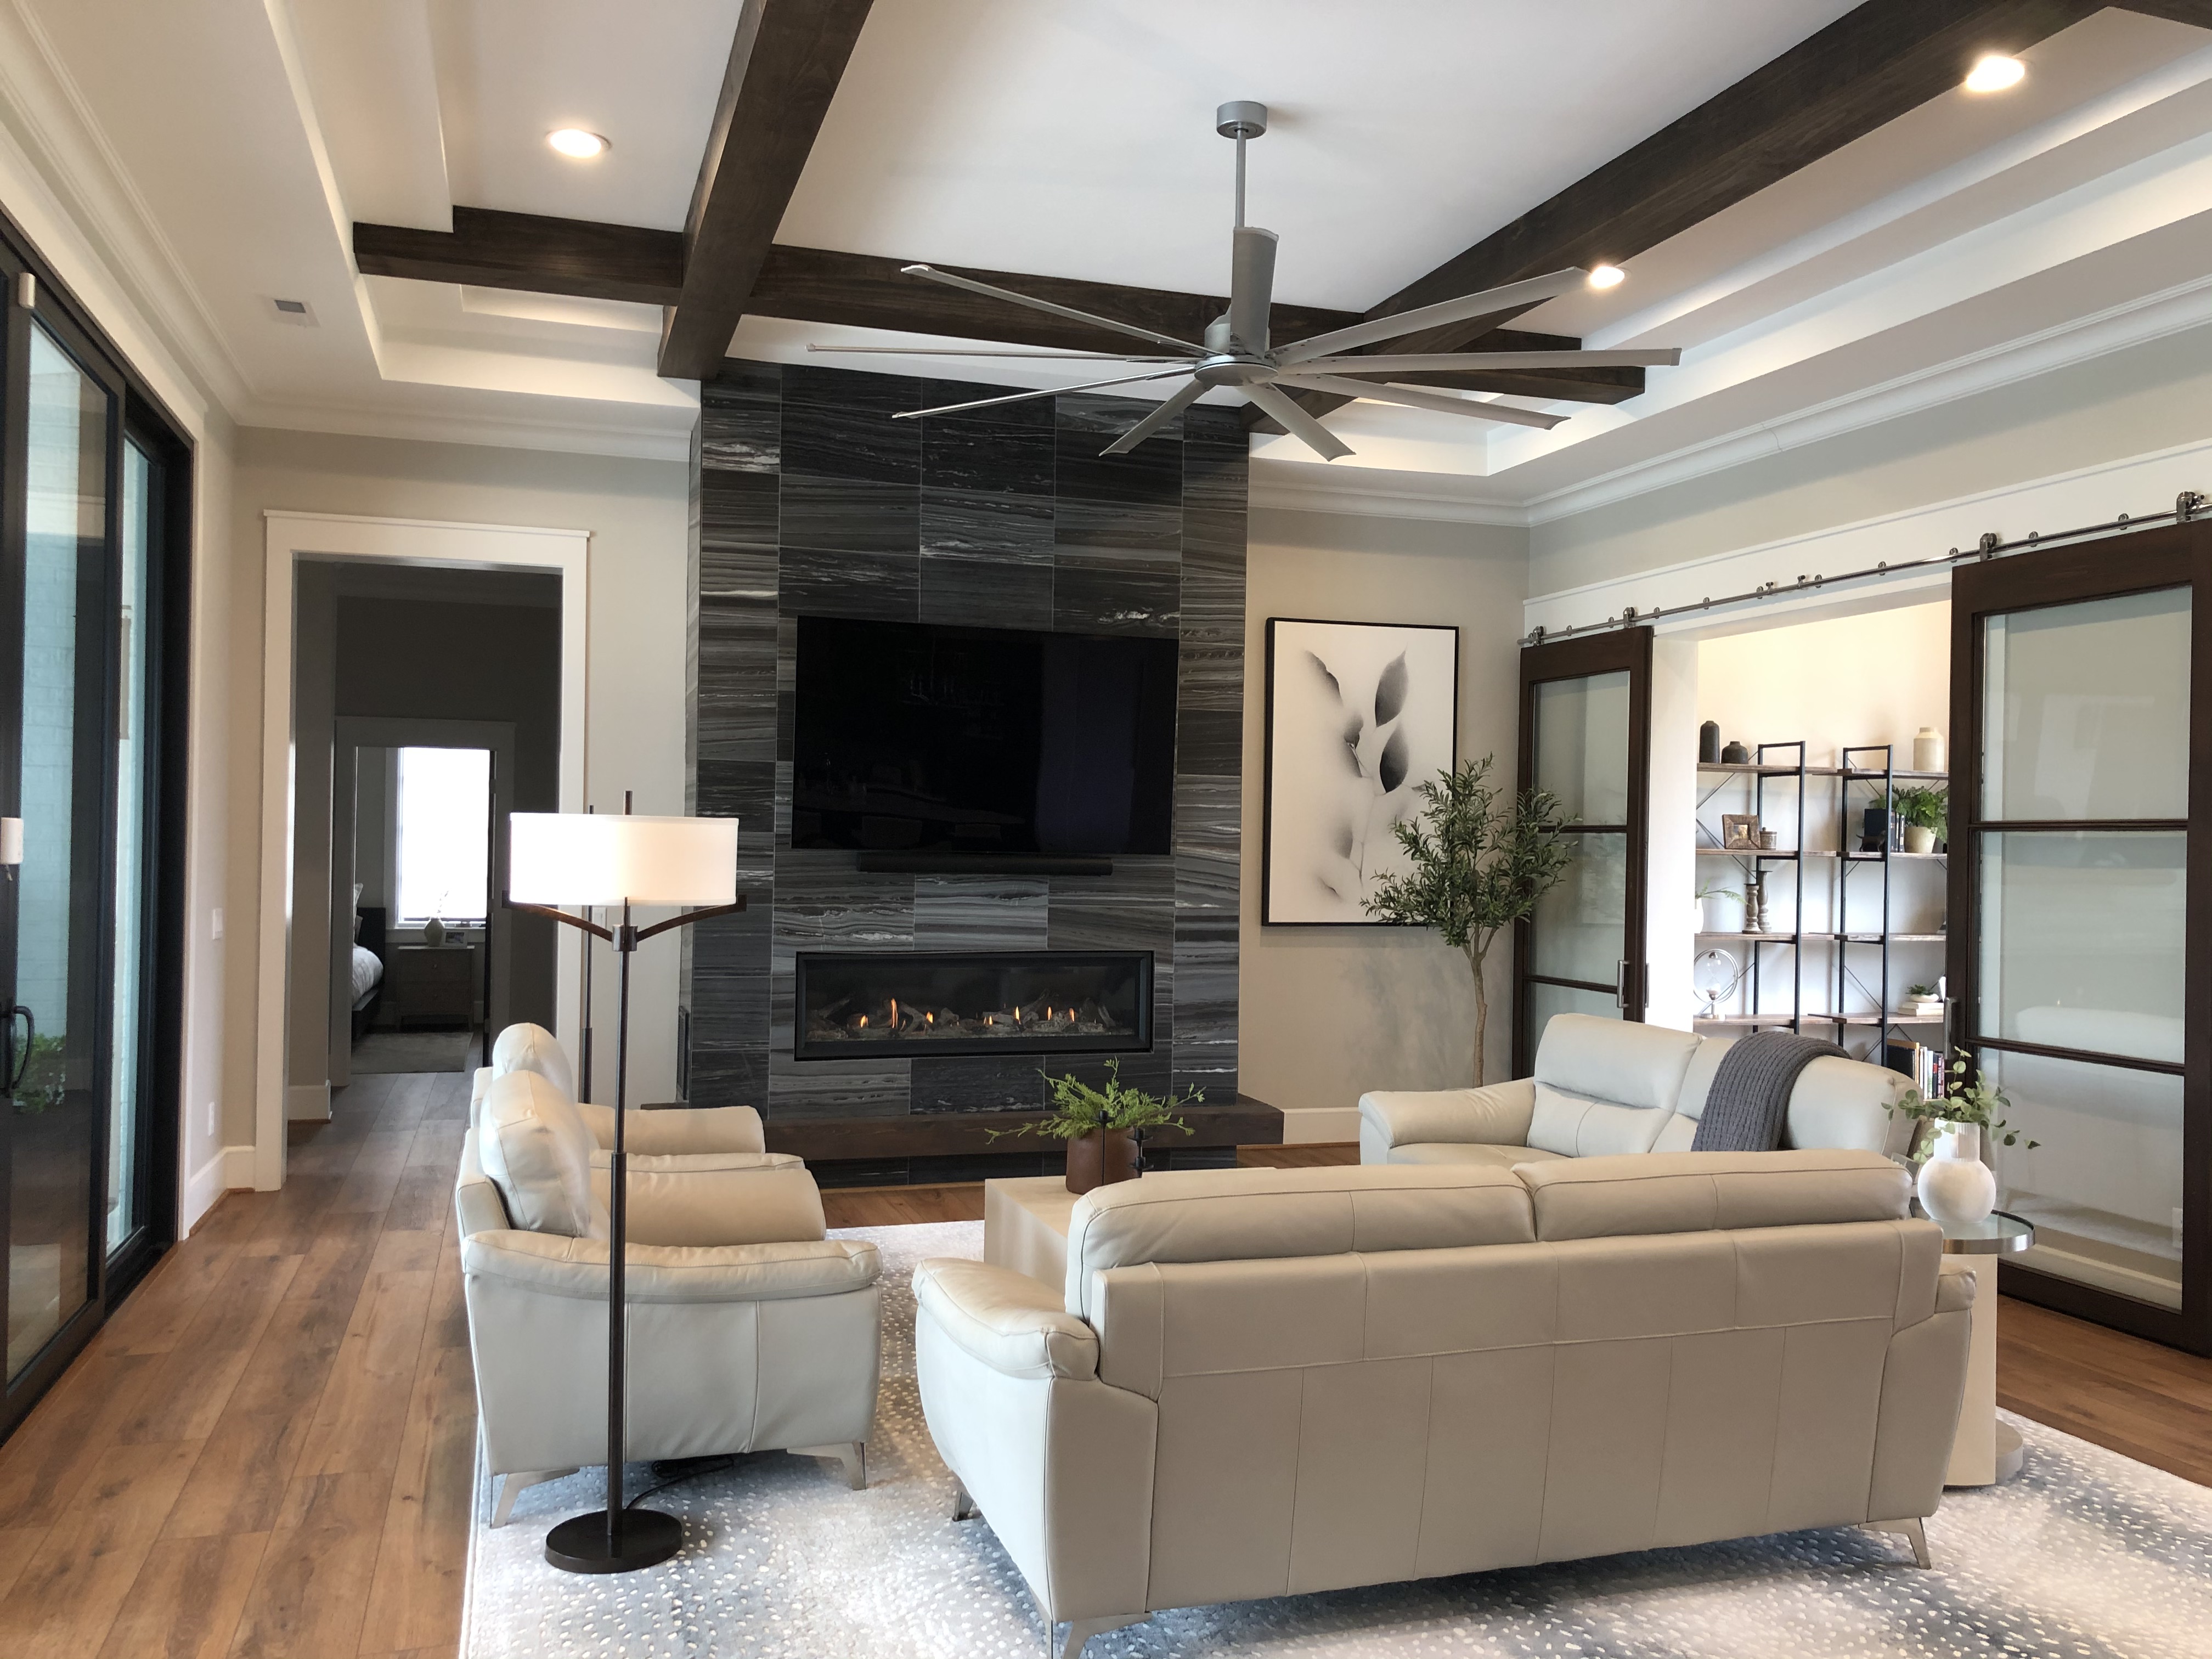 Guide To Selecting A Large Room Ceiling Fan